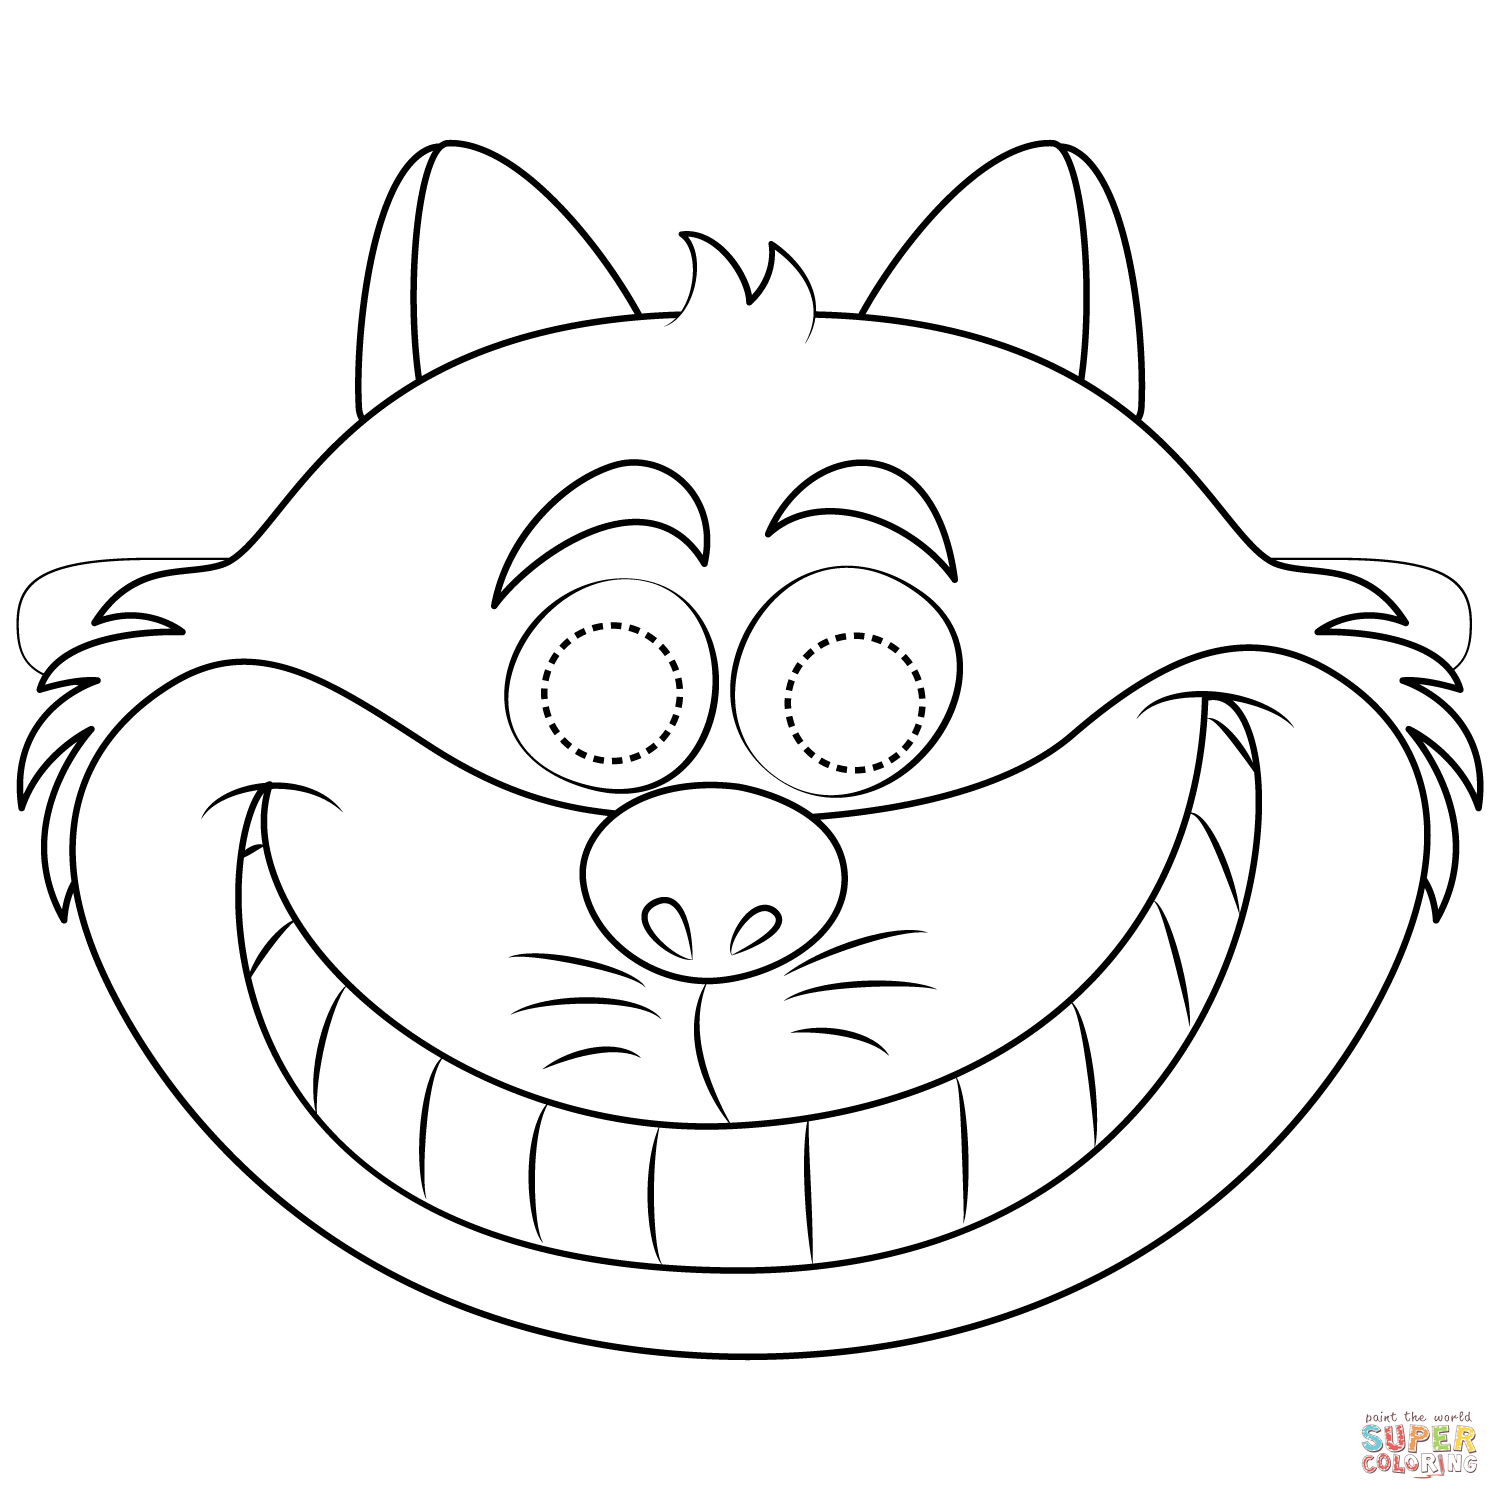 cheshire-cat-mask-coloring-page-free-printable-coloring-page